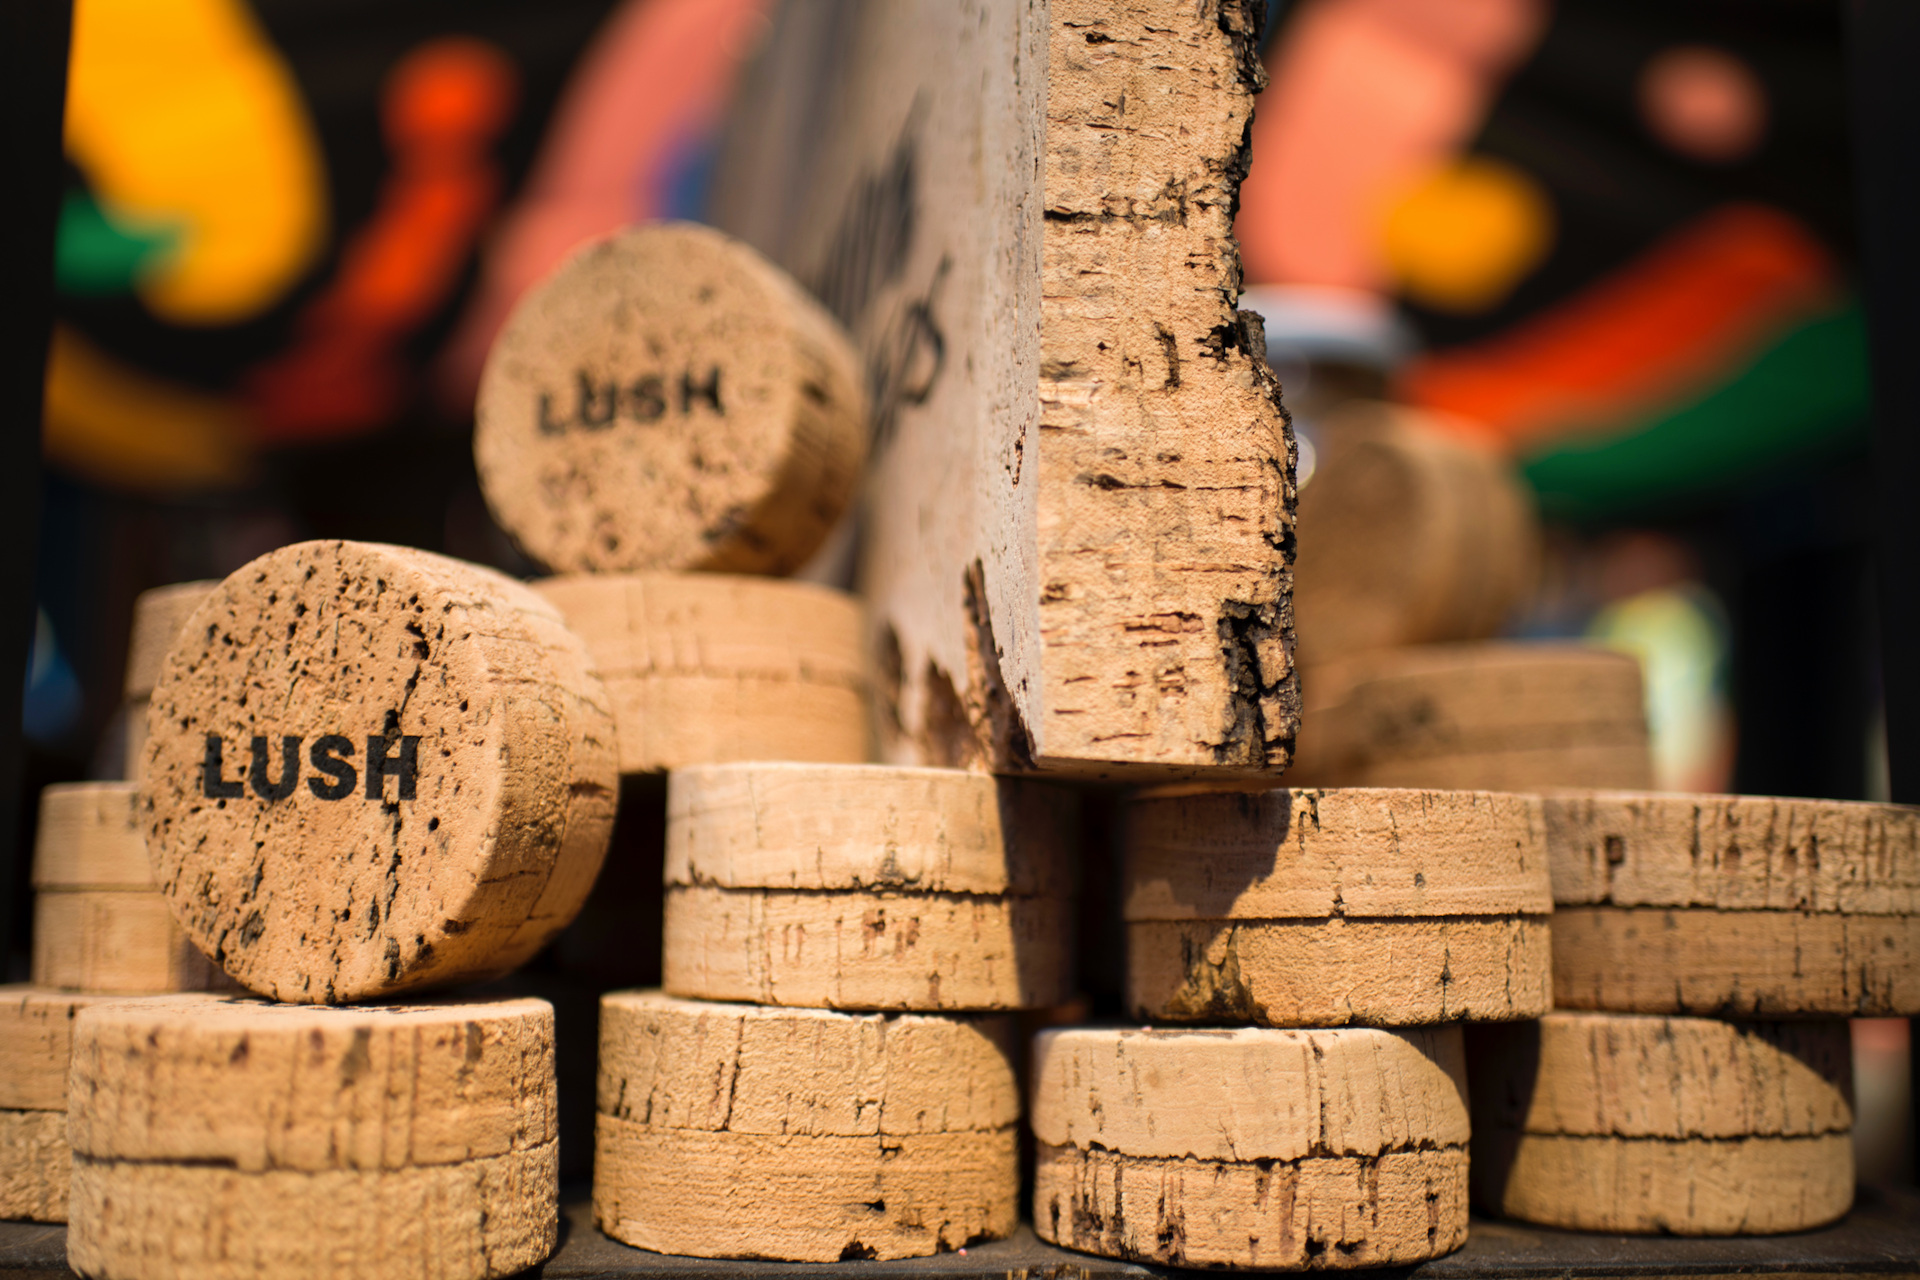 Cork pots with Lush logo on the front